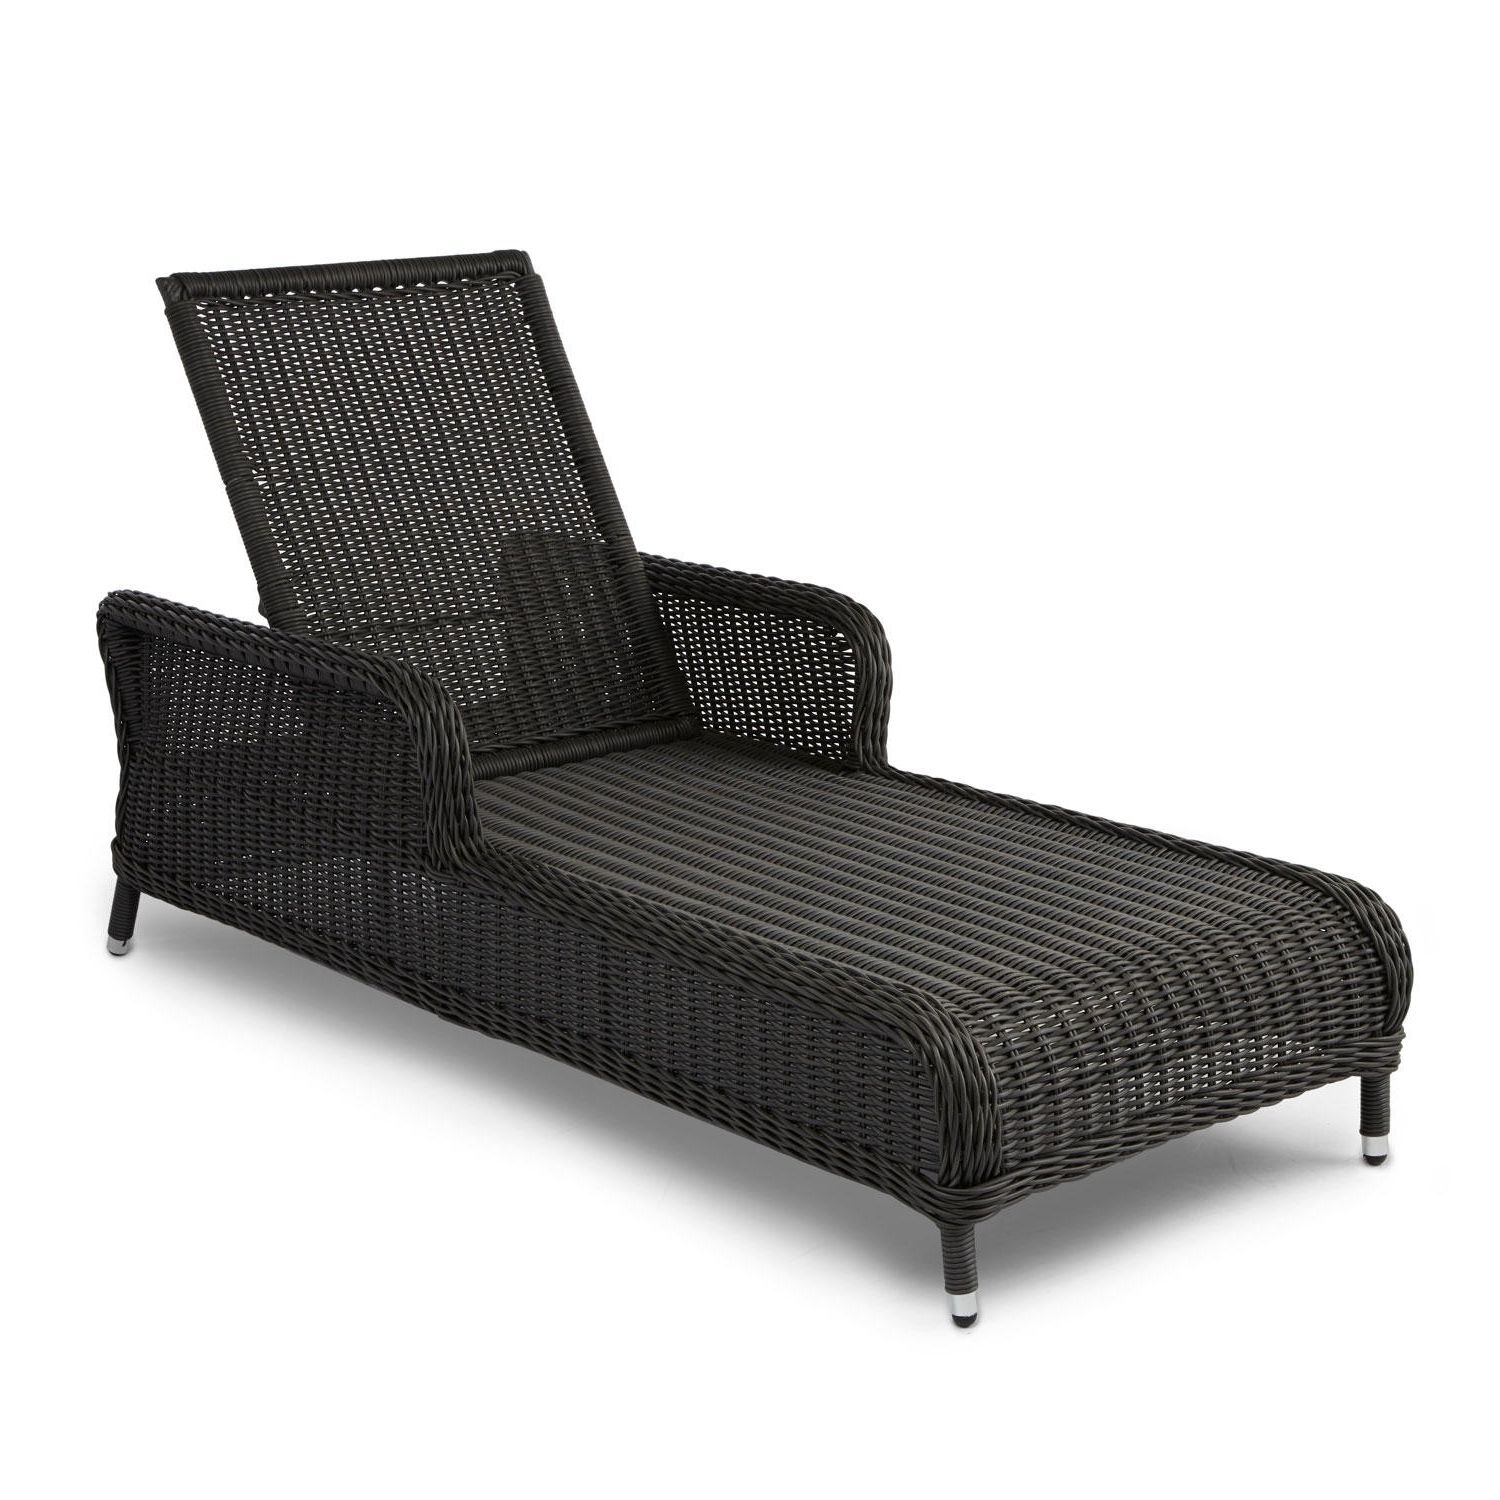 Outdoor : Zero Gravity Lounge Chair Outdoor Chaise Lounges Pertaining To Widely Used Zero Chaise Lounges (View 11 of 15)